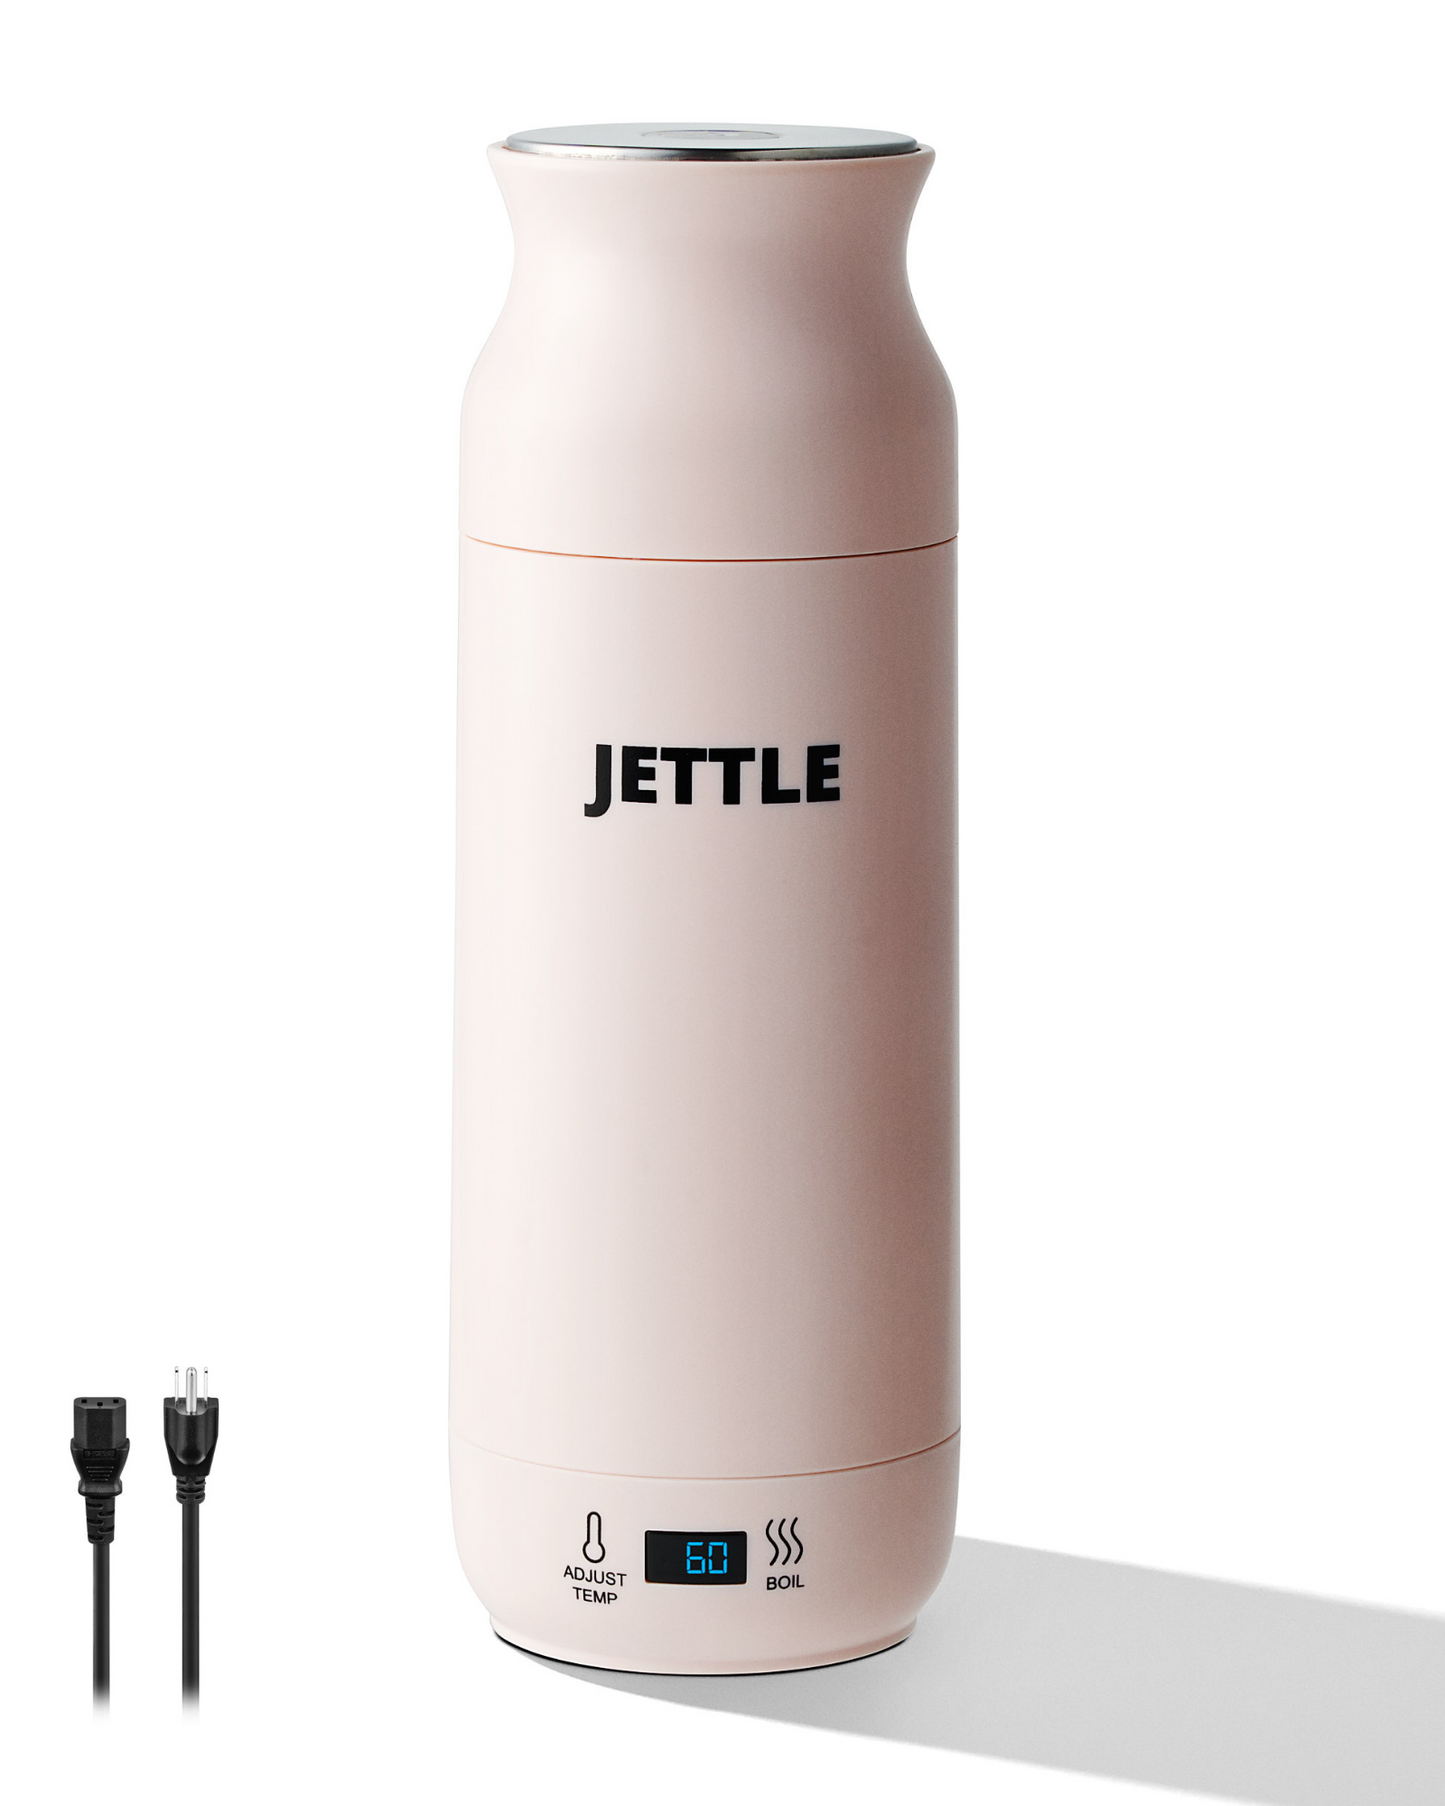 Jettle Electric Kettle - Travel Portable Heater for Coffee, Tea